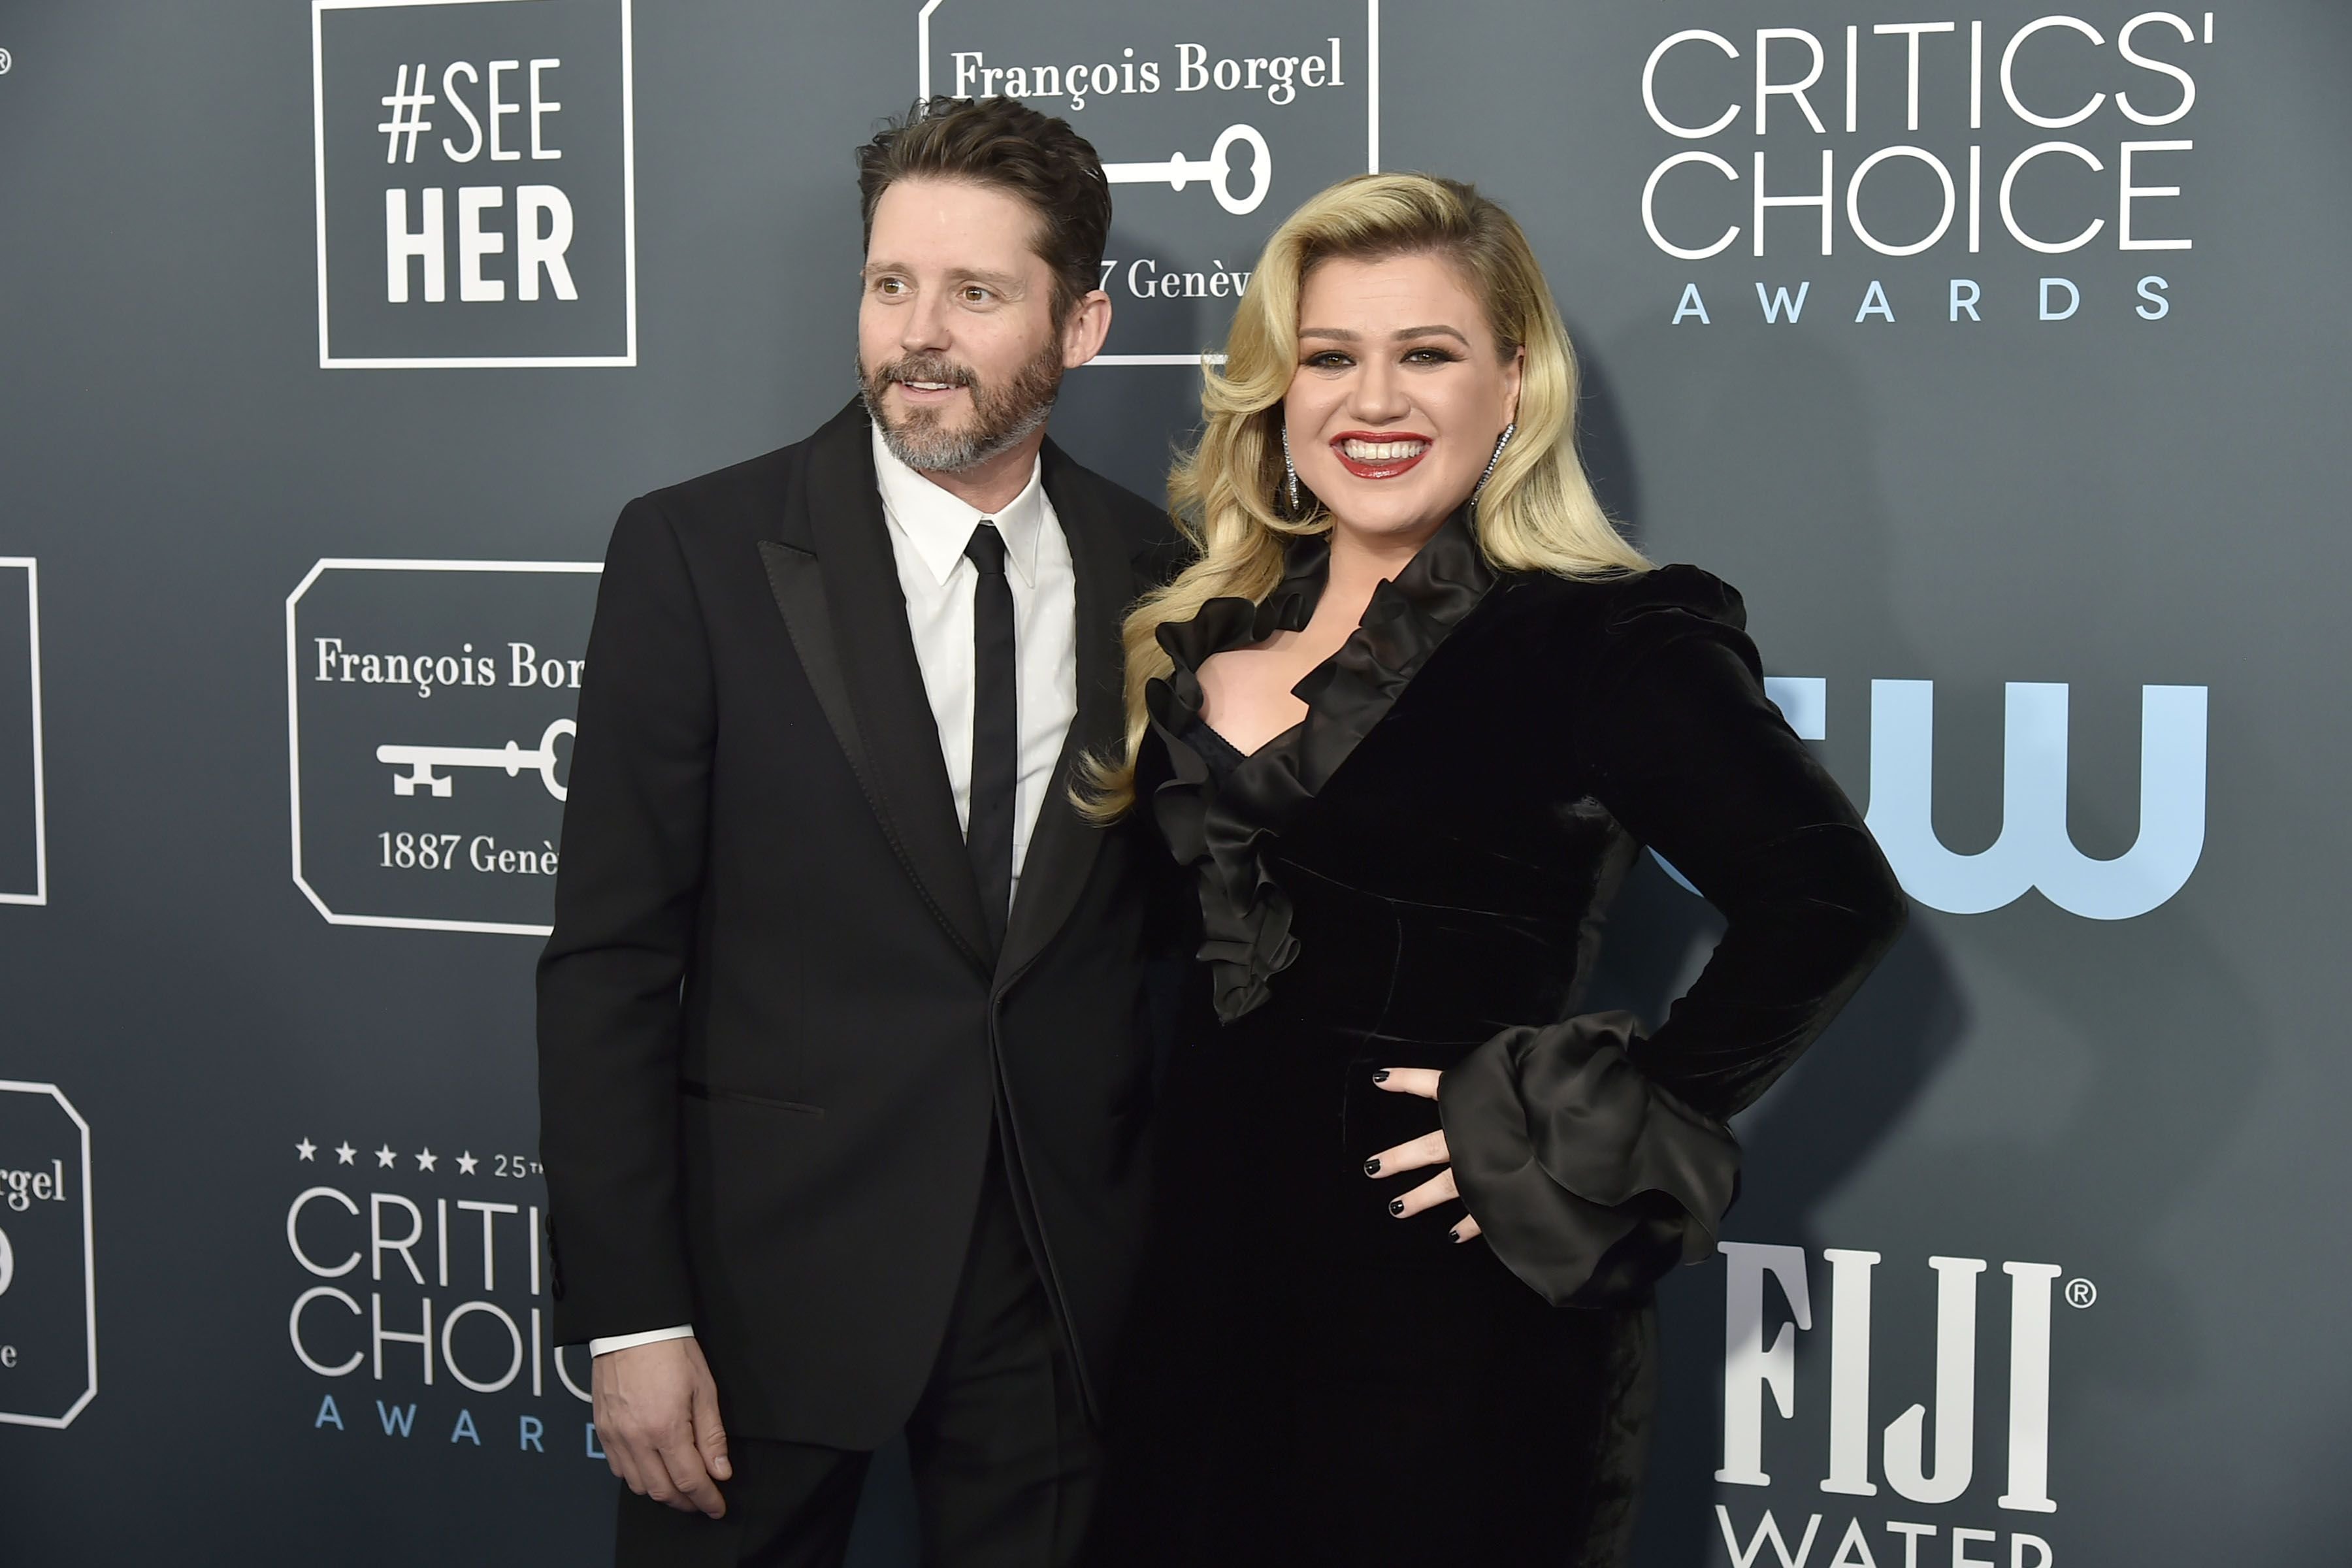 Brandon Blackstock and Kelly Clarkson at the arrivals for the 25th Annual Critics' Choice Awards at Barker Hangar on January 12, 2020 | Photo: Getty Images